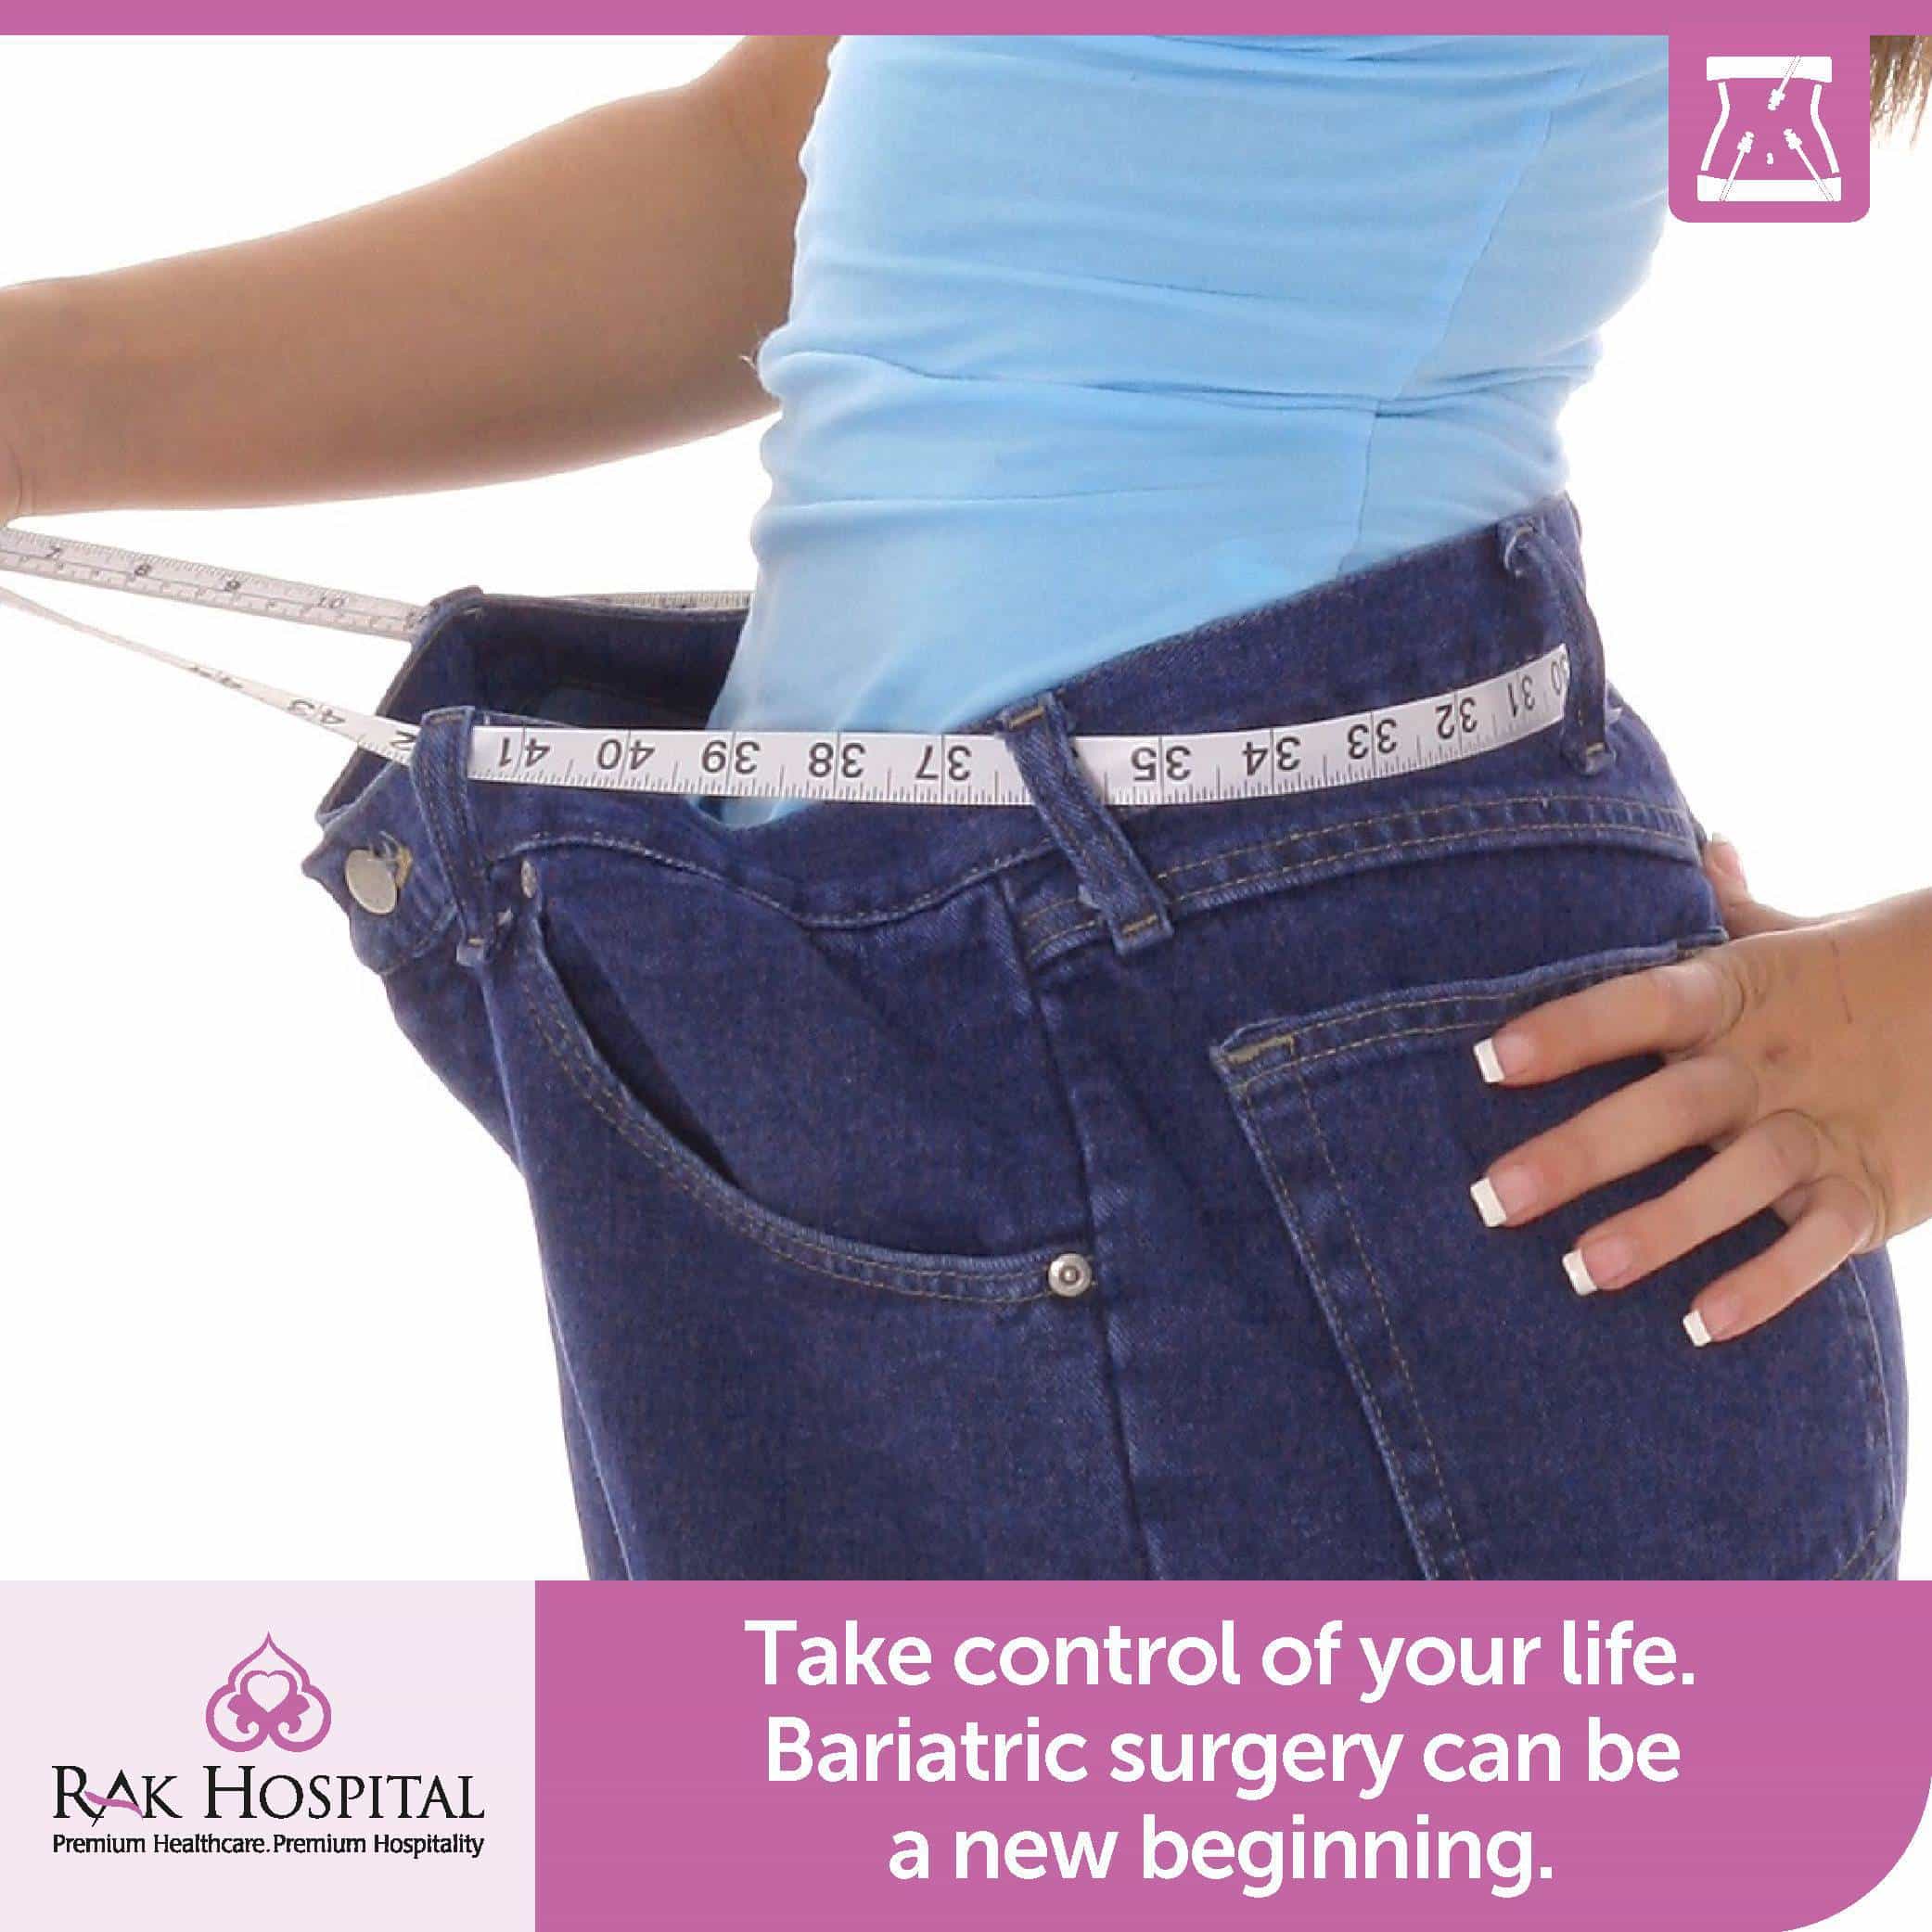 Gastrectomy Bariatric surgery can be a new beginning